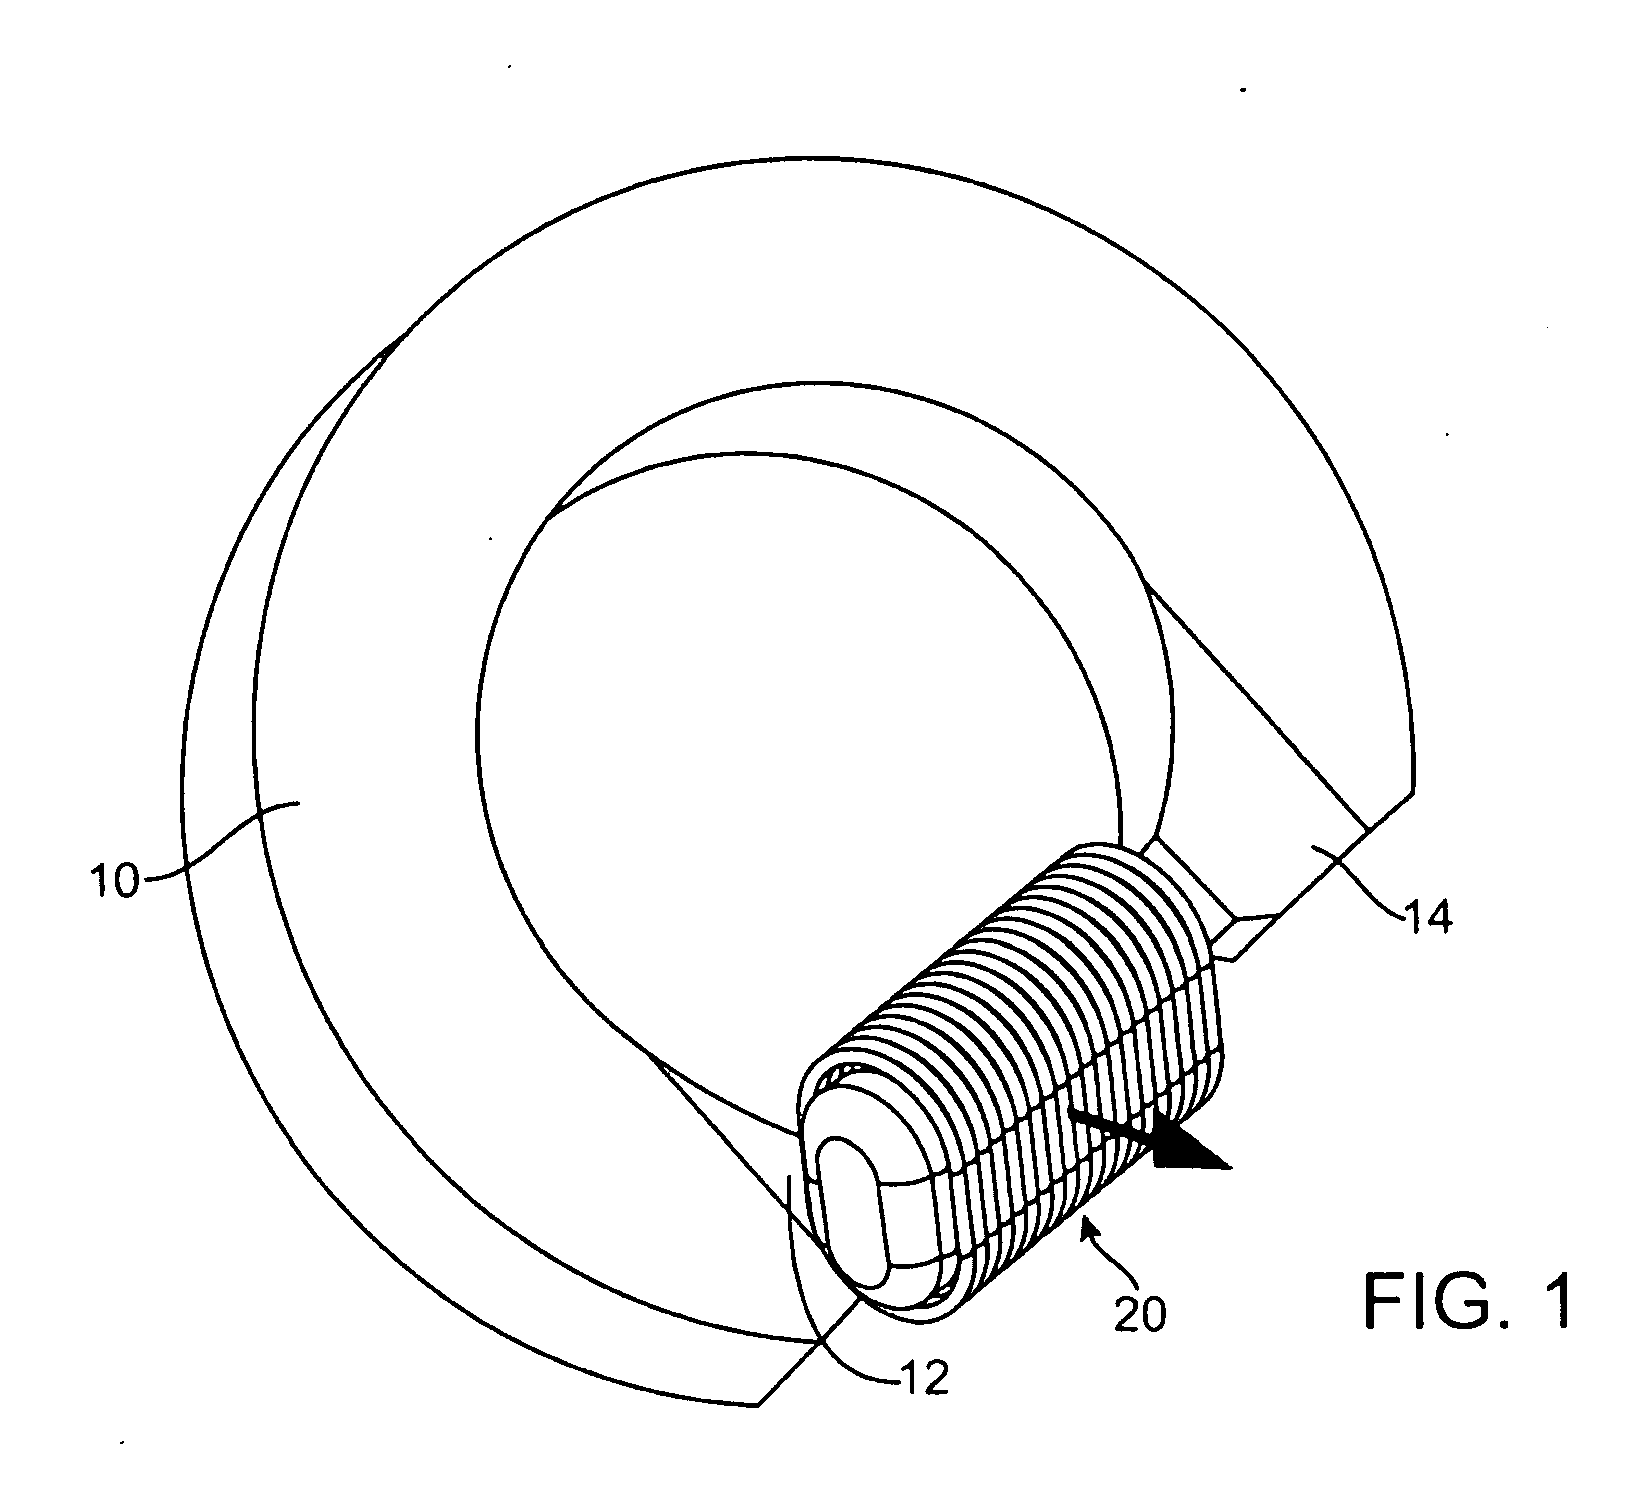 Intra-oral charging systems and methods